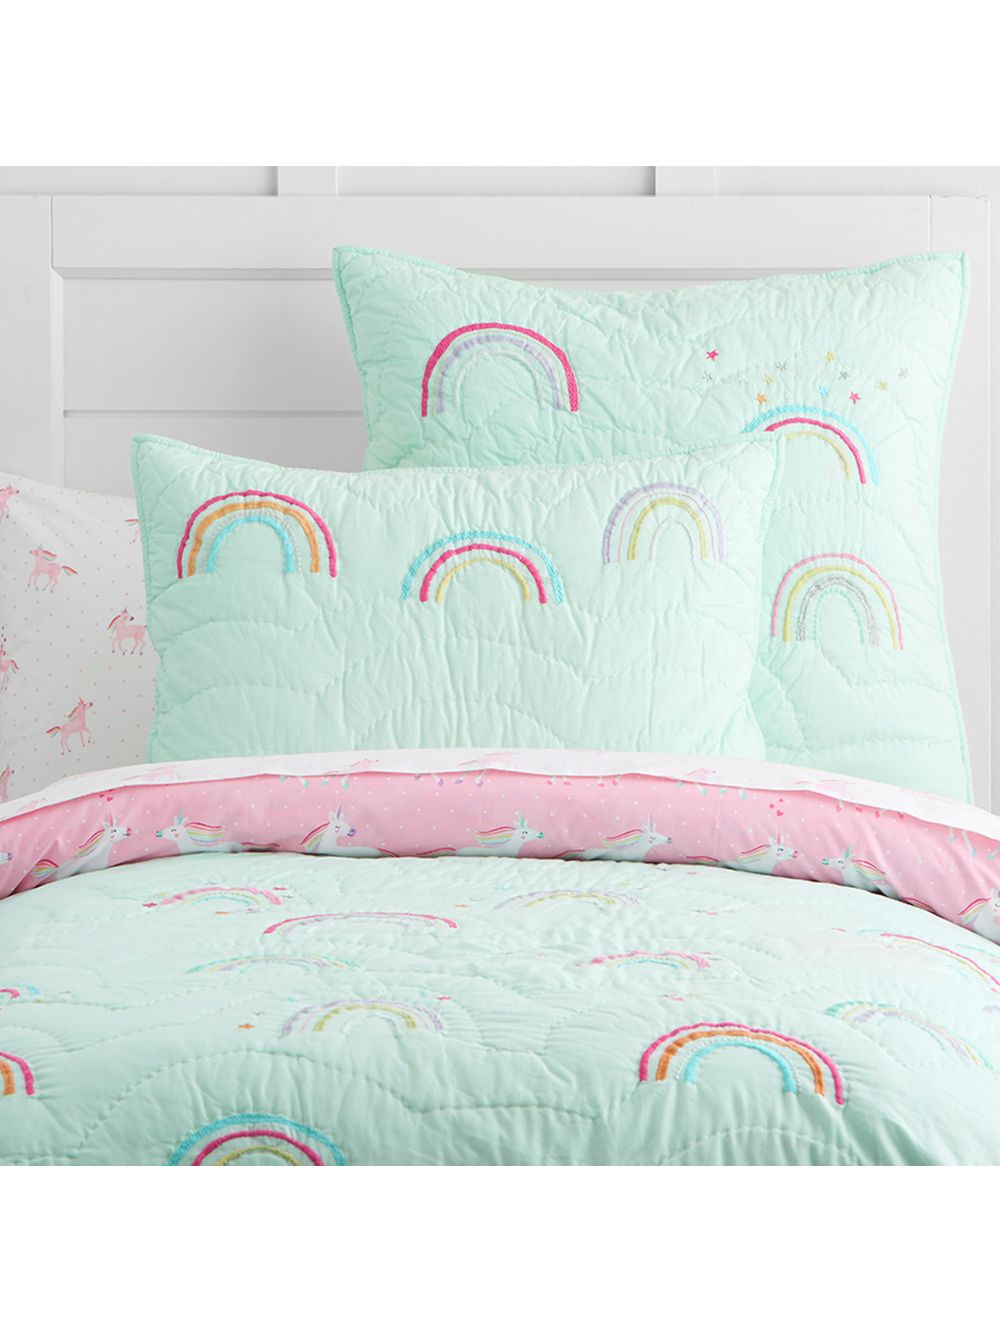 Pottery Barn Kids Molly Rainbow Toddler Bed Quilt Aqua Multi At